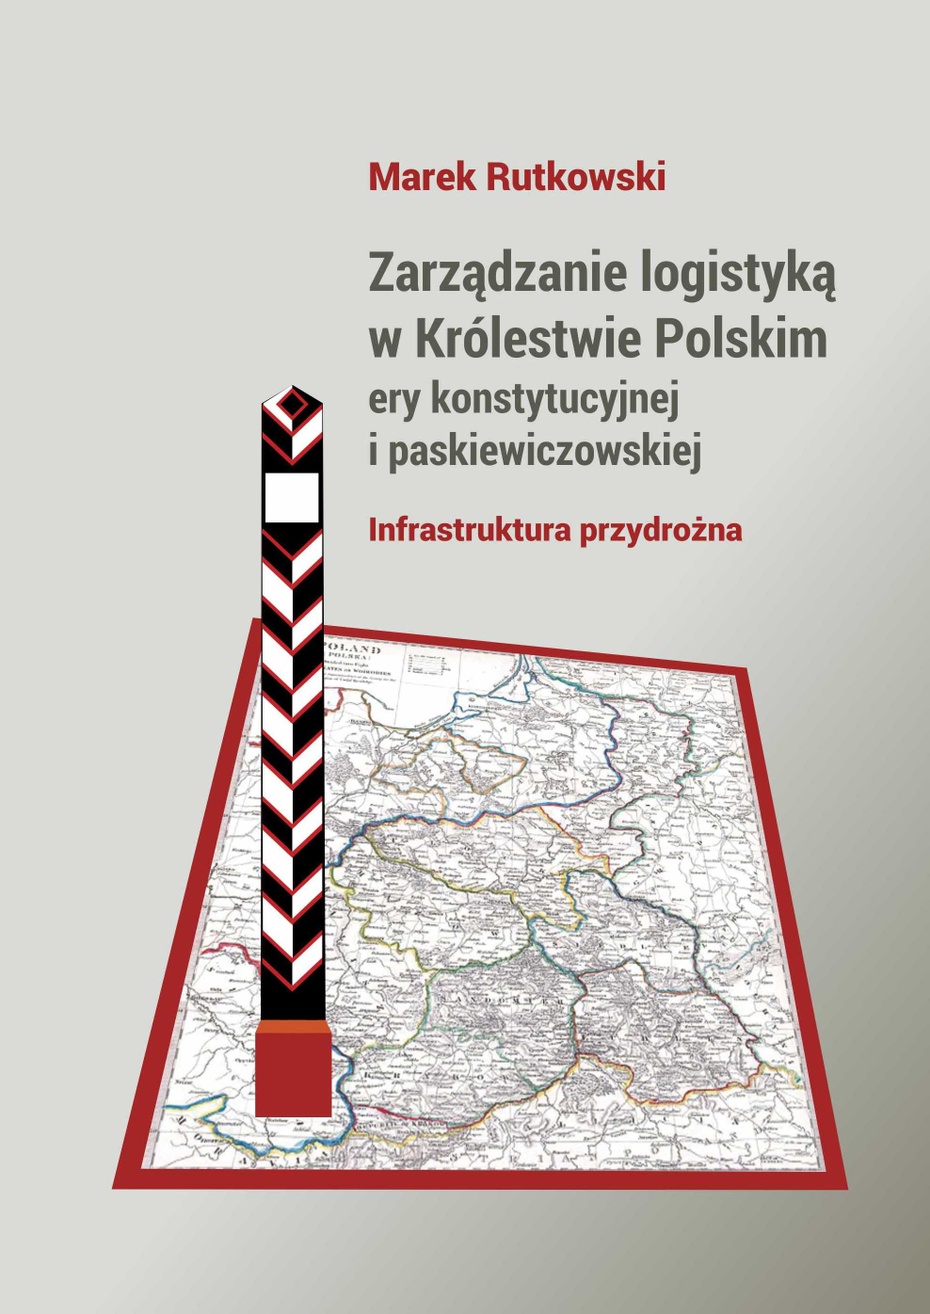 Management of logistics in 19th century Kingdom of Poland. The road infrastructure